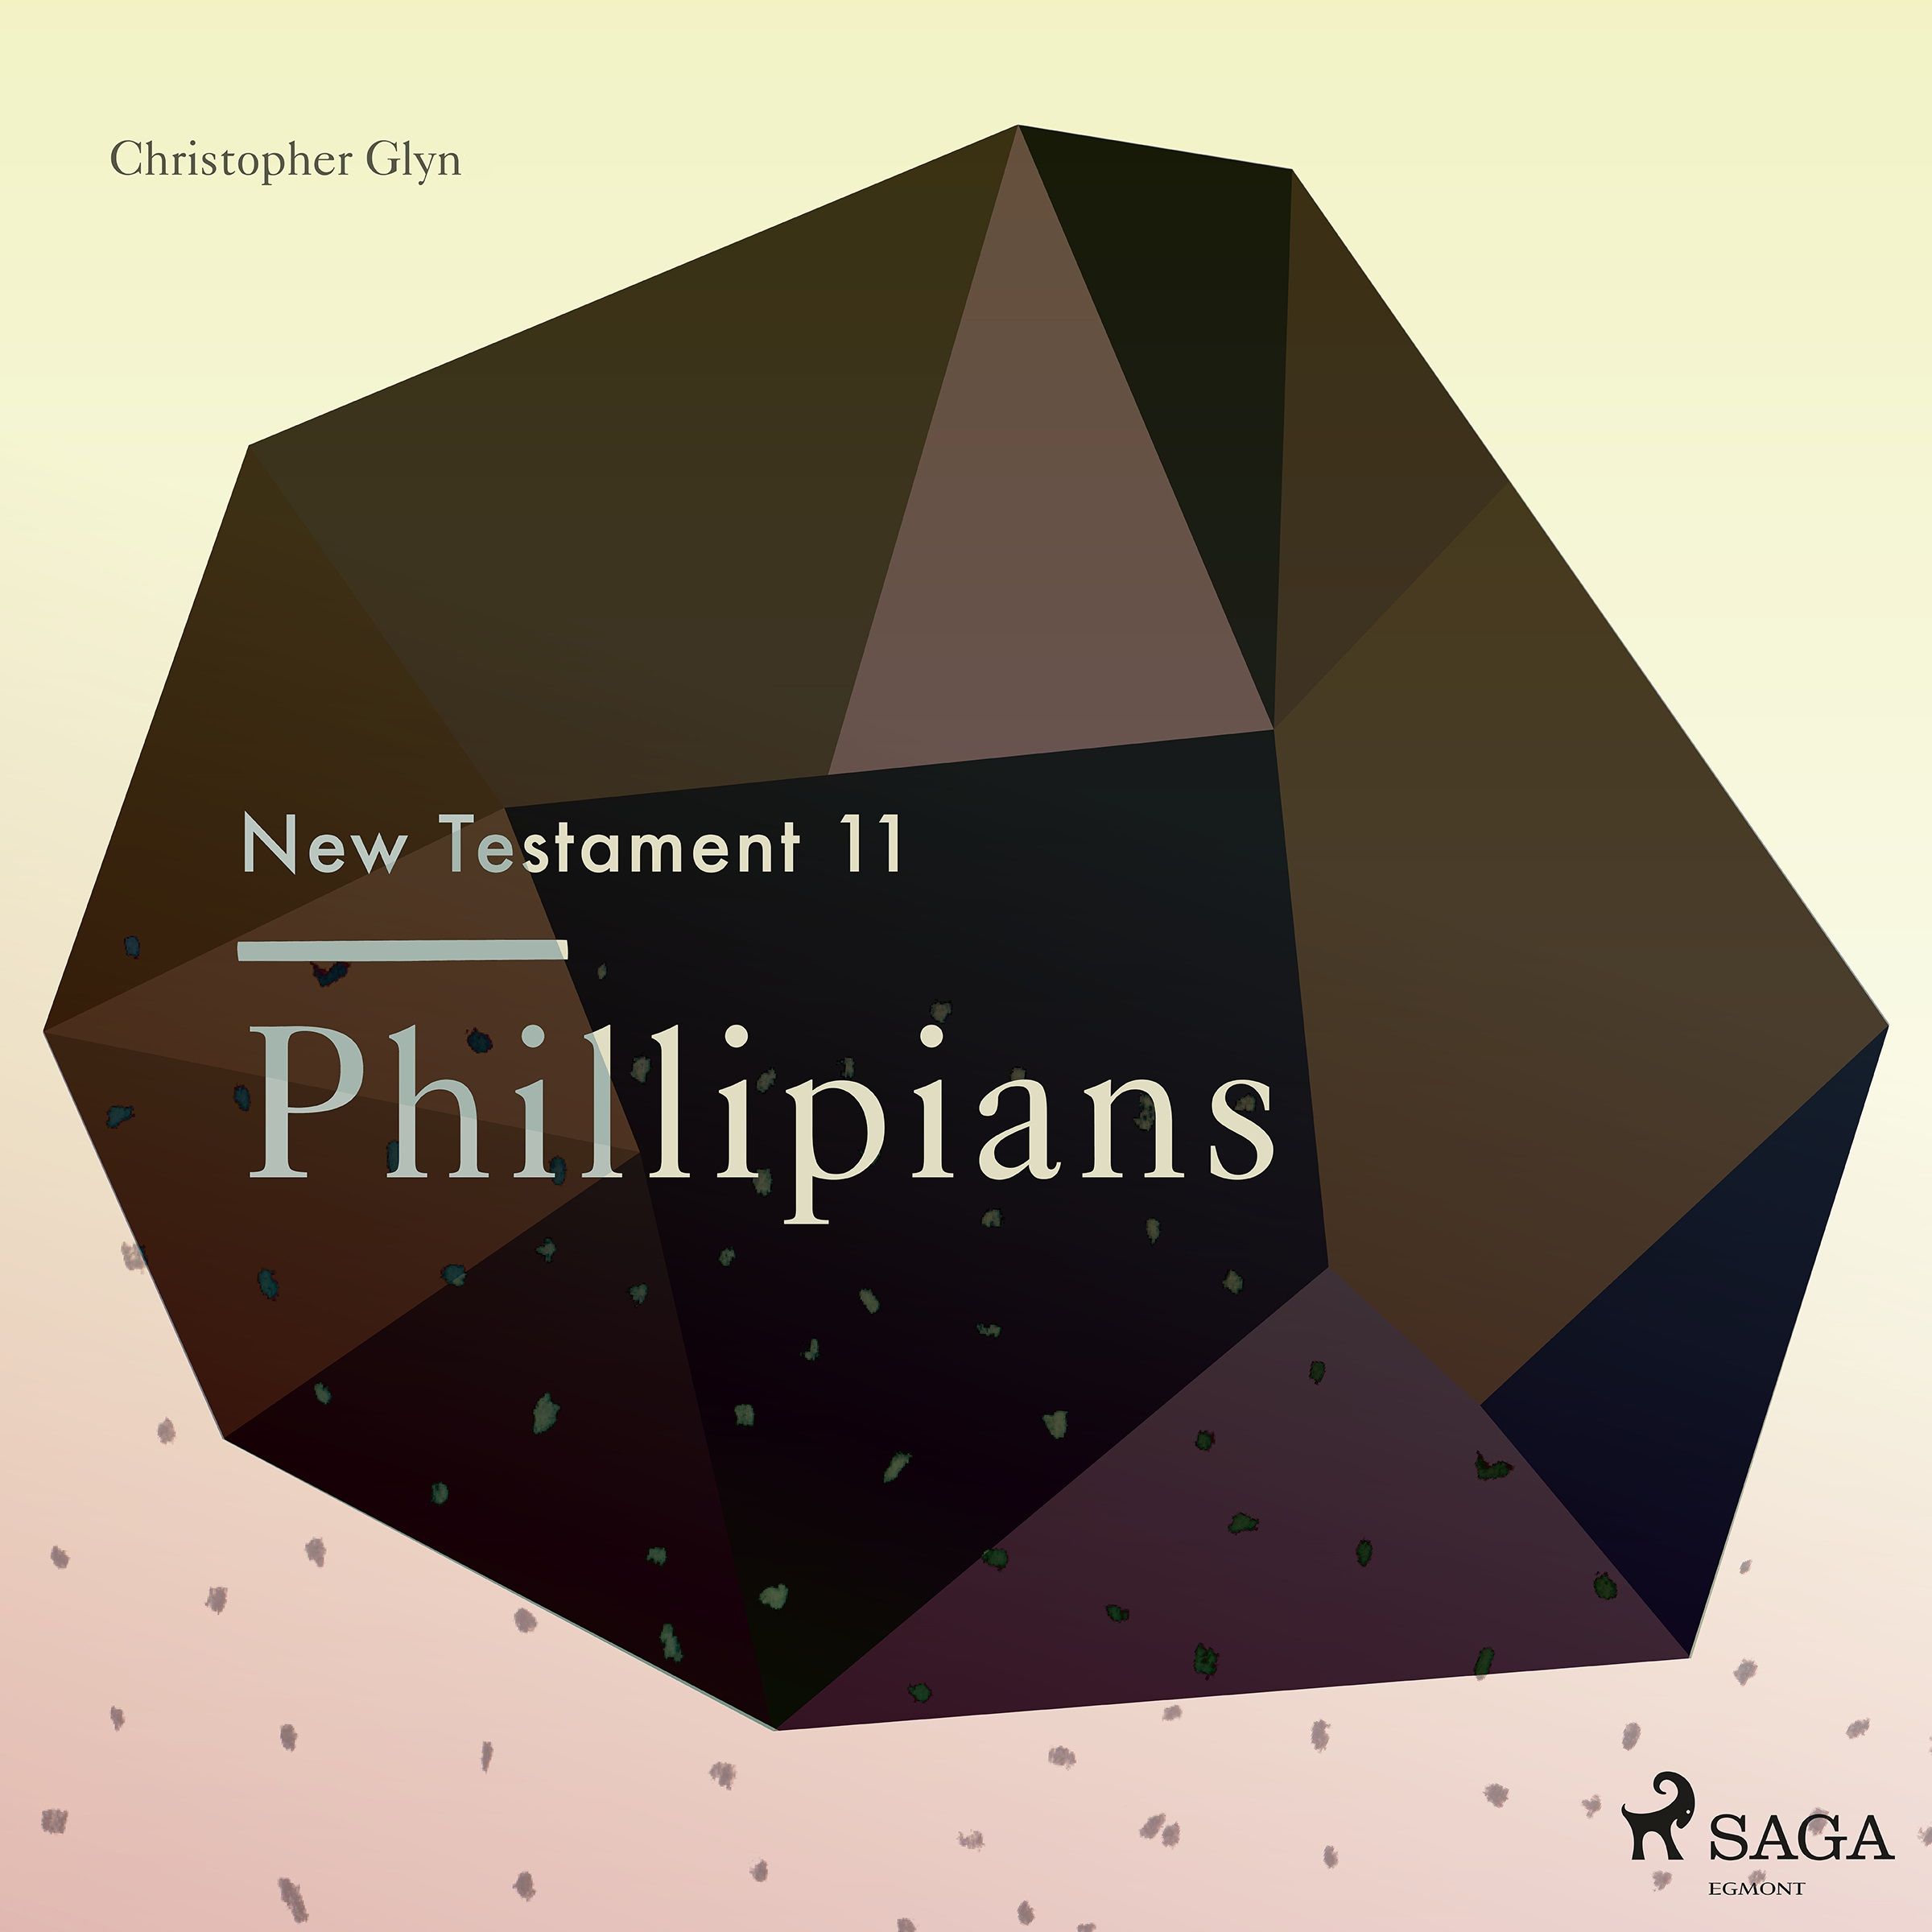 The New Testament 11 - Phillipians, audiobook by Christopher Glyn